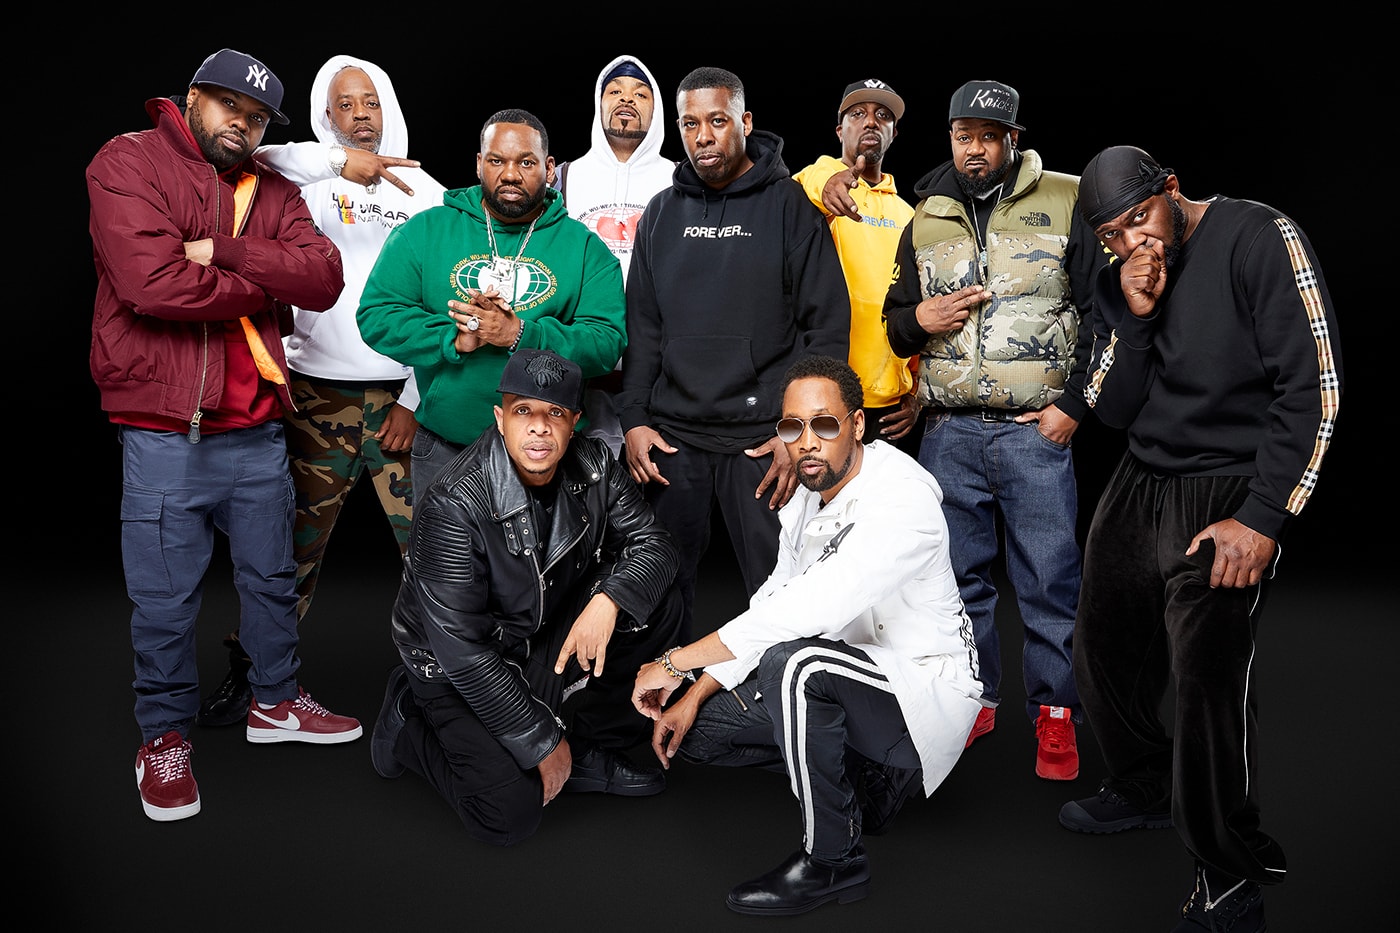 Nas Wu-Tang Clan NY State of Mind Tour dates announcement info